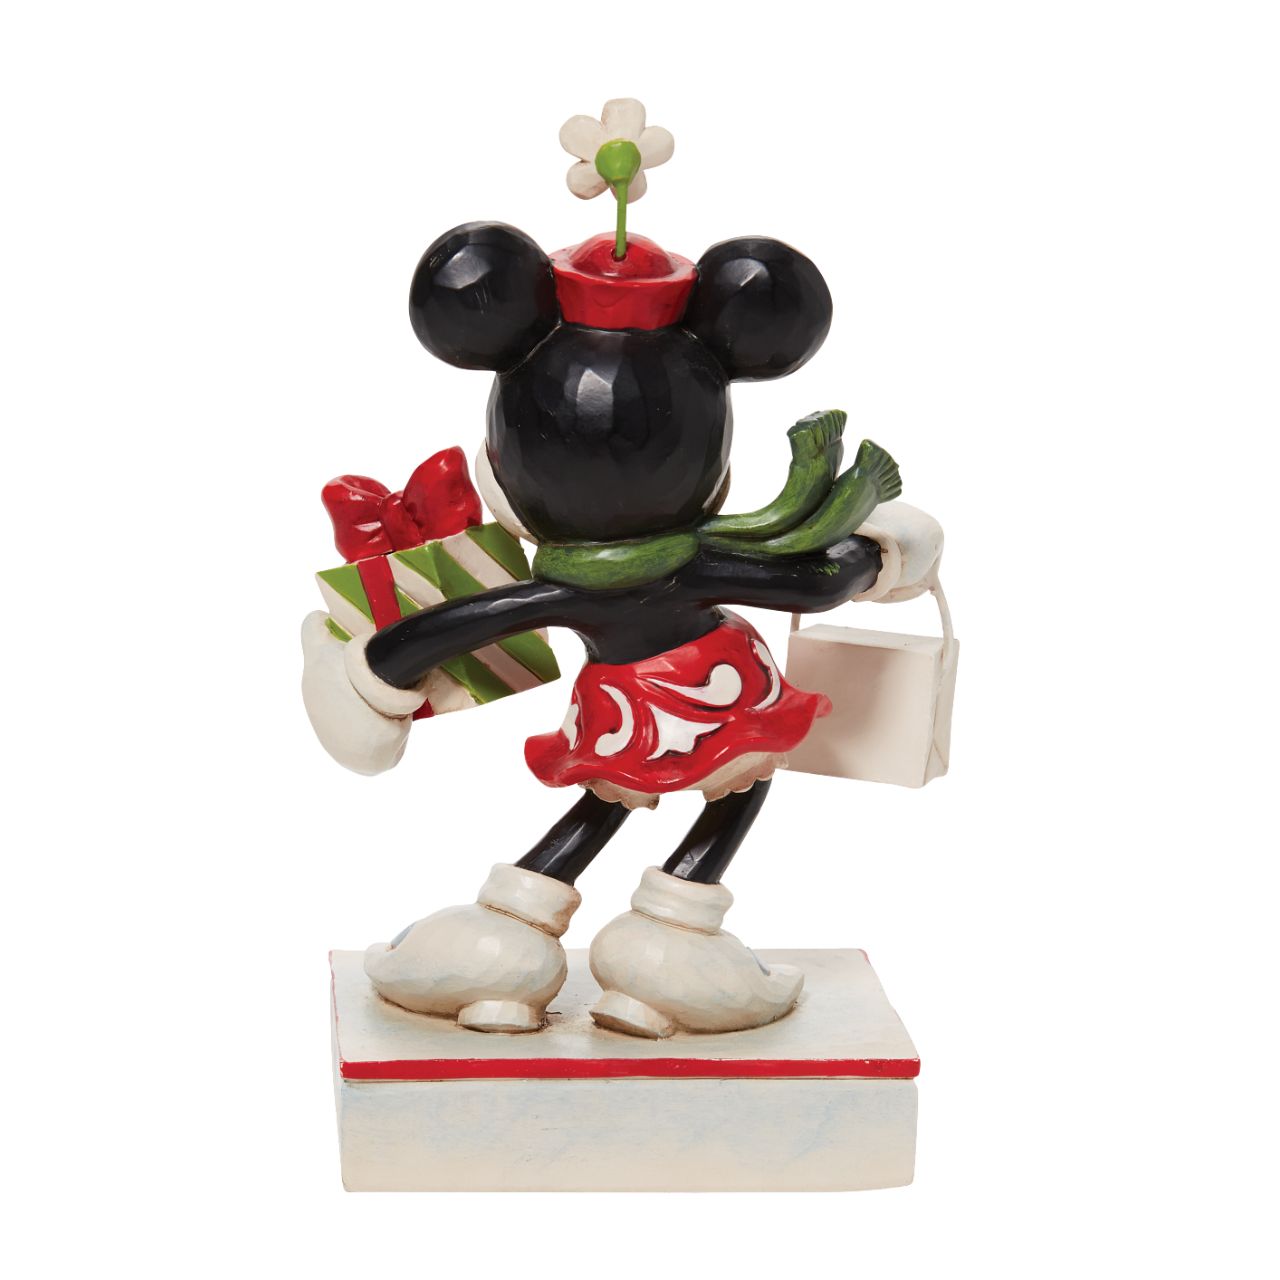 Jim Shore Christmas Minnie with Bag and Present Figurine  Disney comes home for the holidays with this festive figurine by Jim Shore. Minnie Mouse is an icon of fashion and friendliness this year as she completes her Christmas shopping. Boasting with bags, she's eager to share the giving spirit with you.